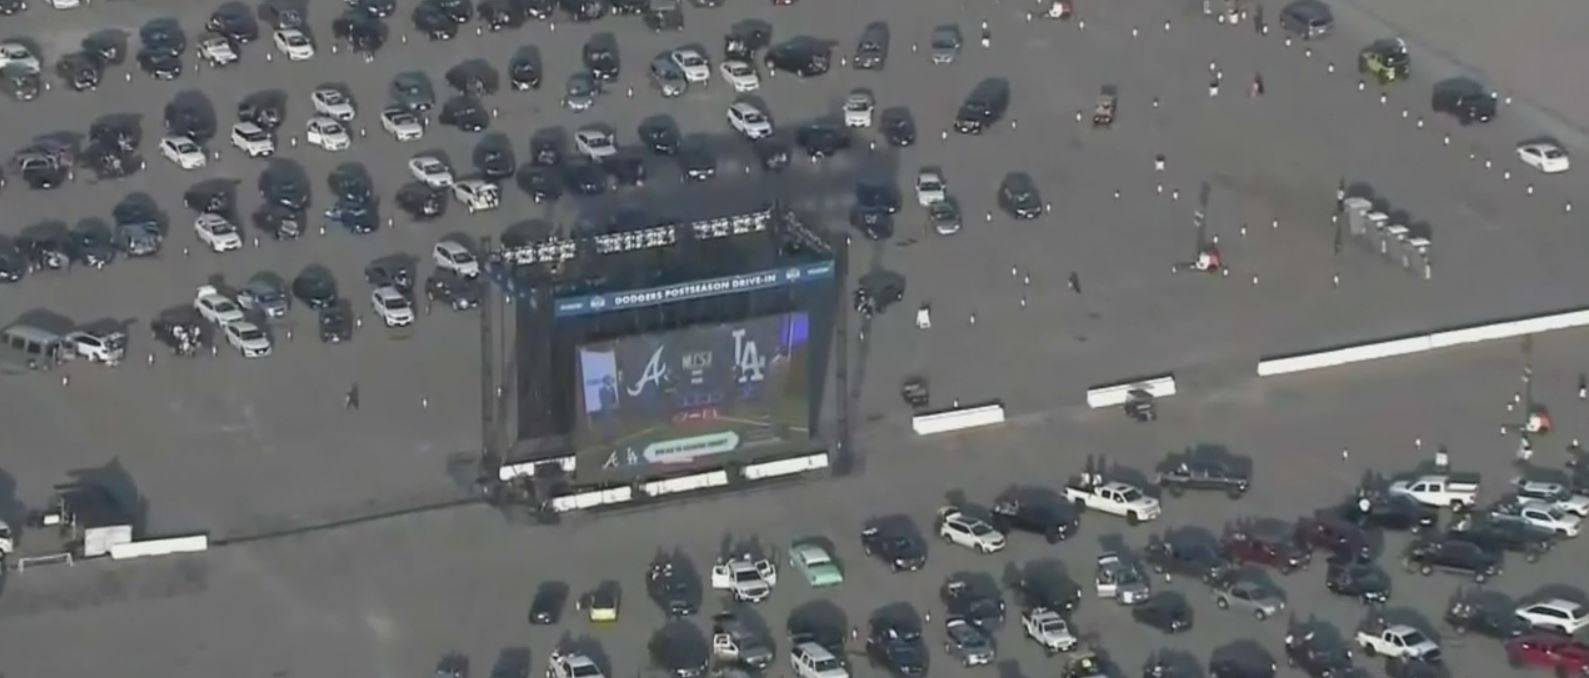 Dodgers To Host World Series Drive-In Viewing Party At Dodger Stadium – CBS Los Angeles